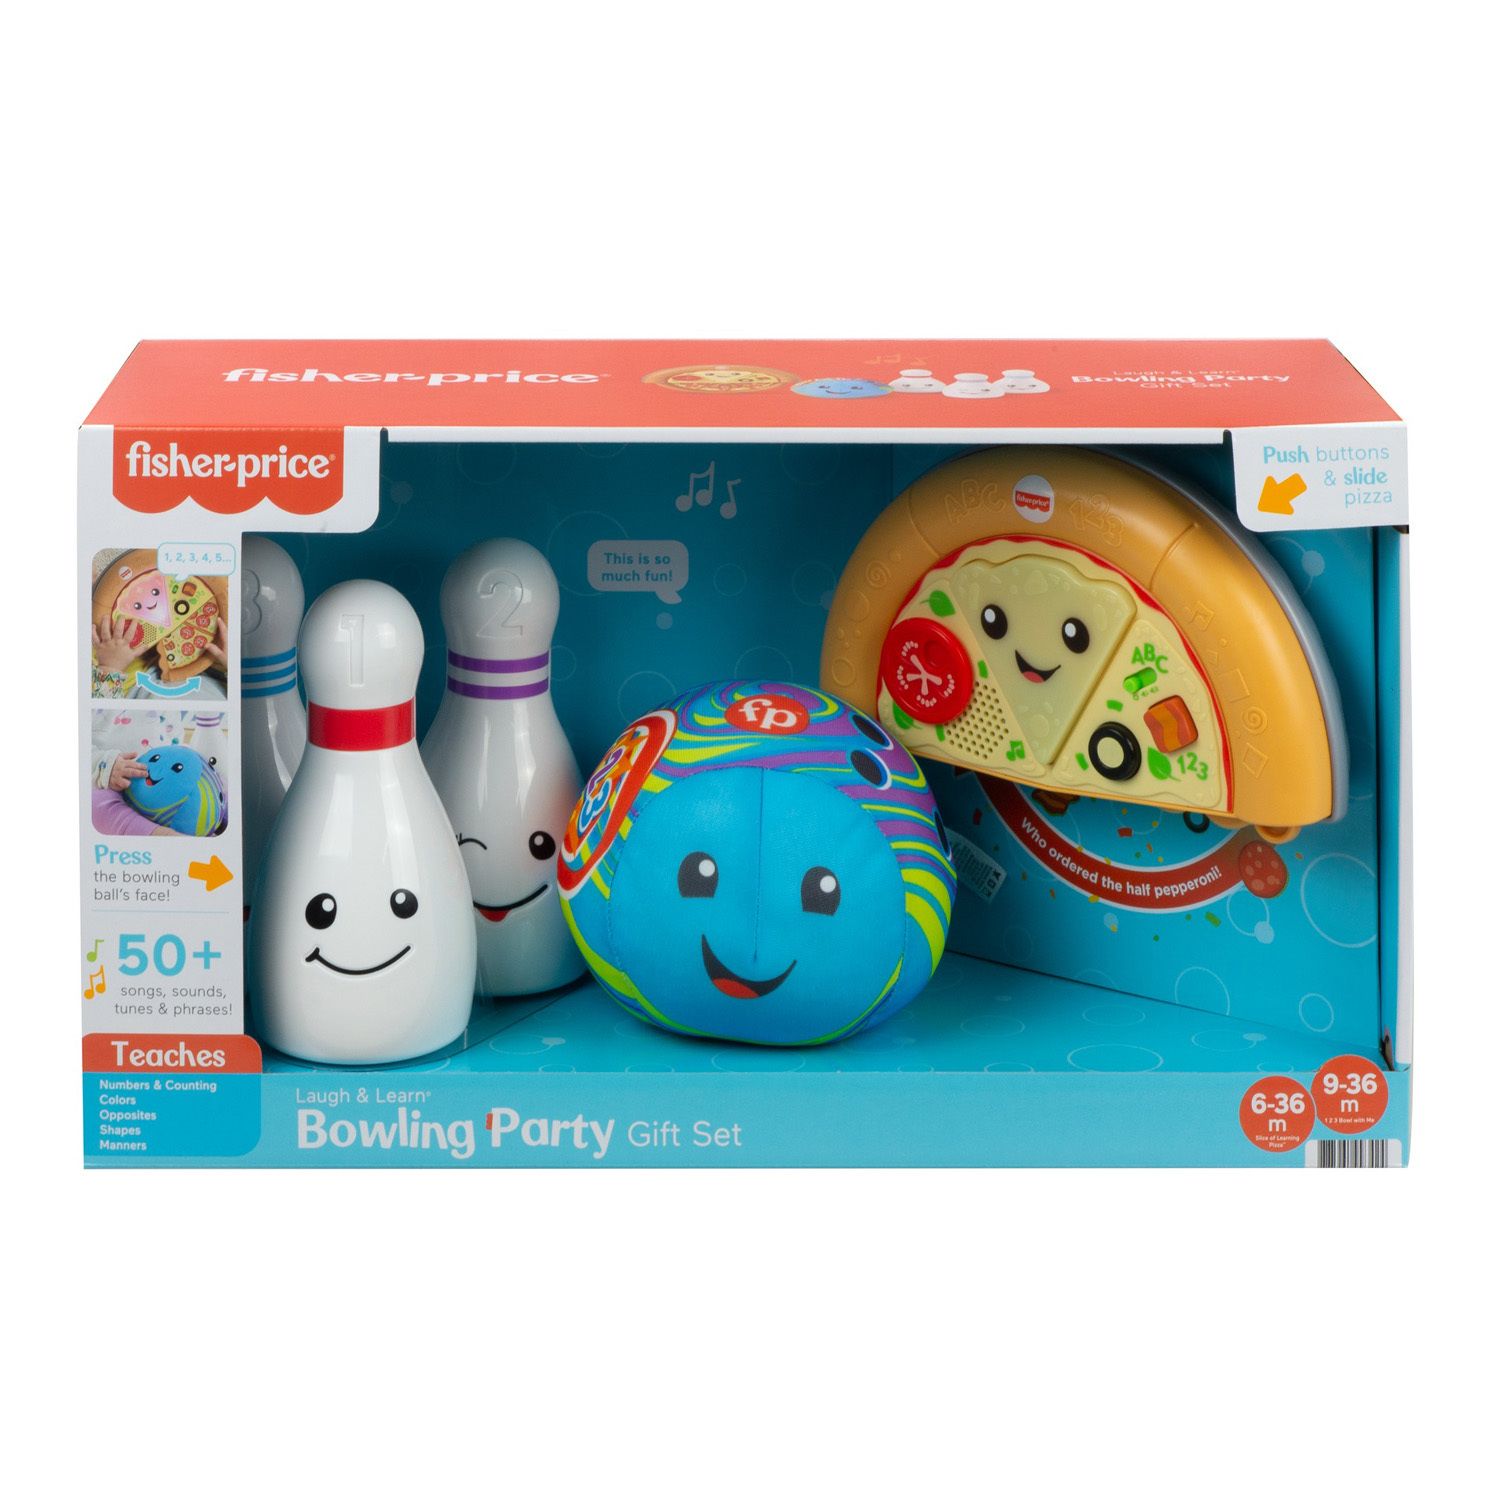 Image for Laugh & Learn Fisher-Price Bowling Party Gift Set at Kohl's.